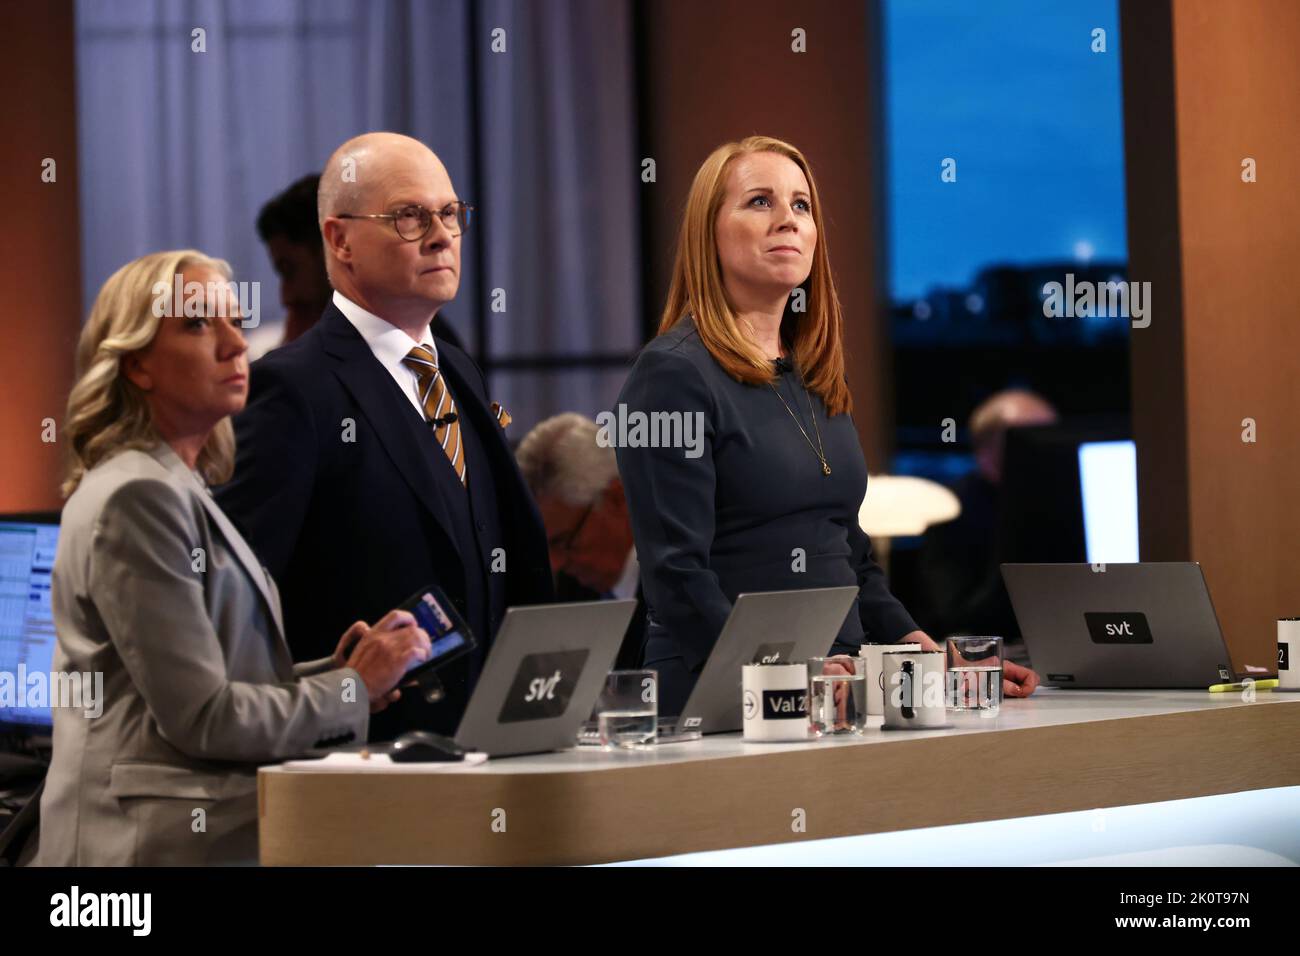 The Swedish parliamentary elections, election day, during Sunday in Stockholm, Sweden. In the picture: Sveriges Television's broadcast during election evening. In the picture: Annie Lööf, The Centre Party (In swedish: centerpartiet). Stock Photo